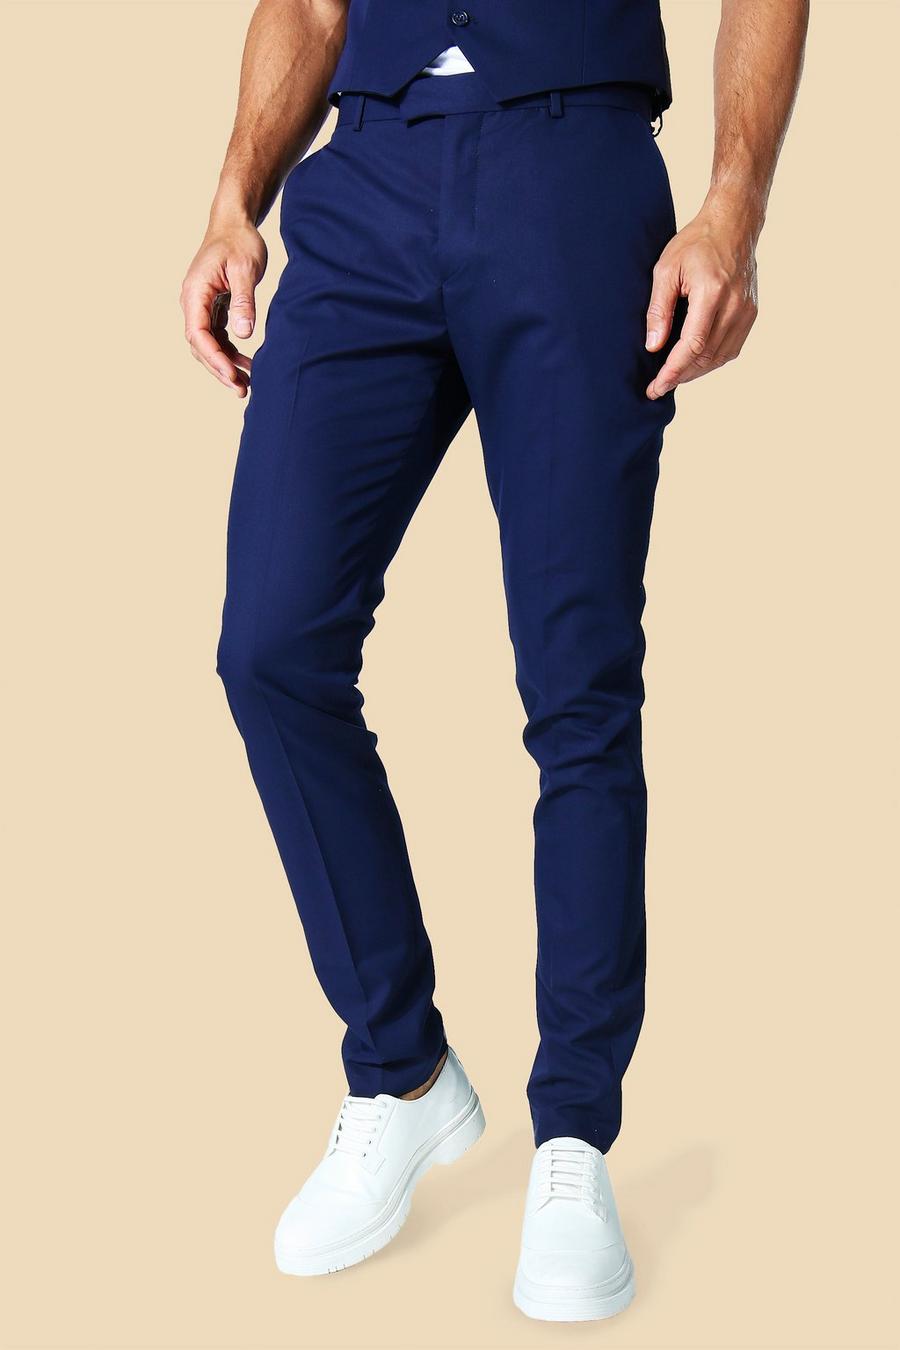 Navy Tall Skinny Fit Pantalons image number 1